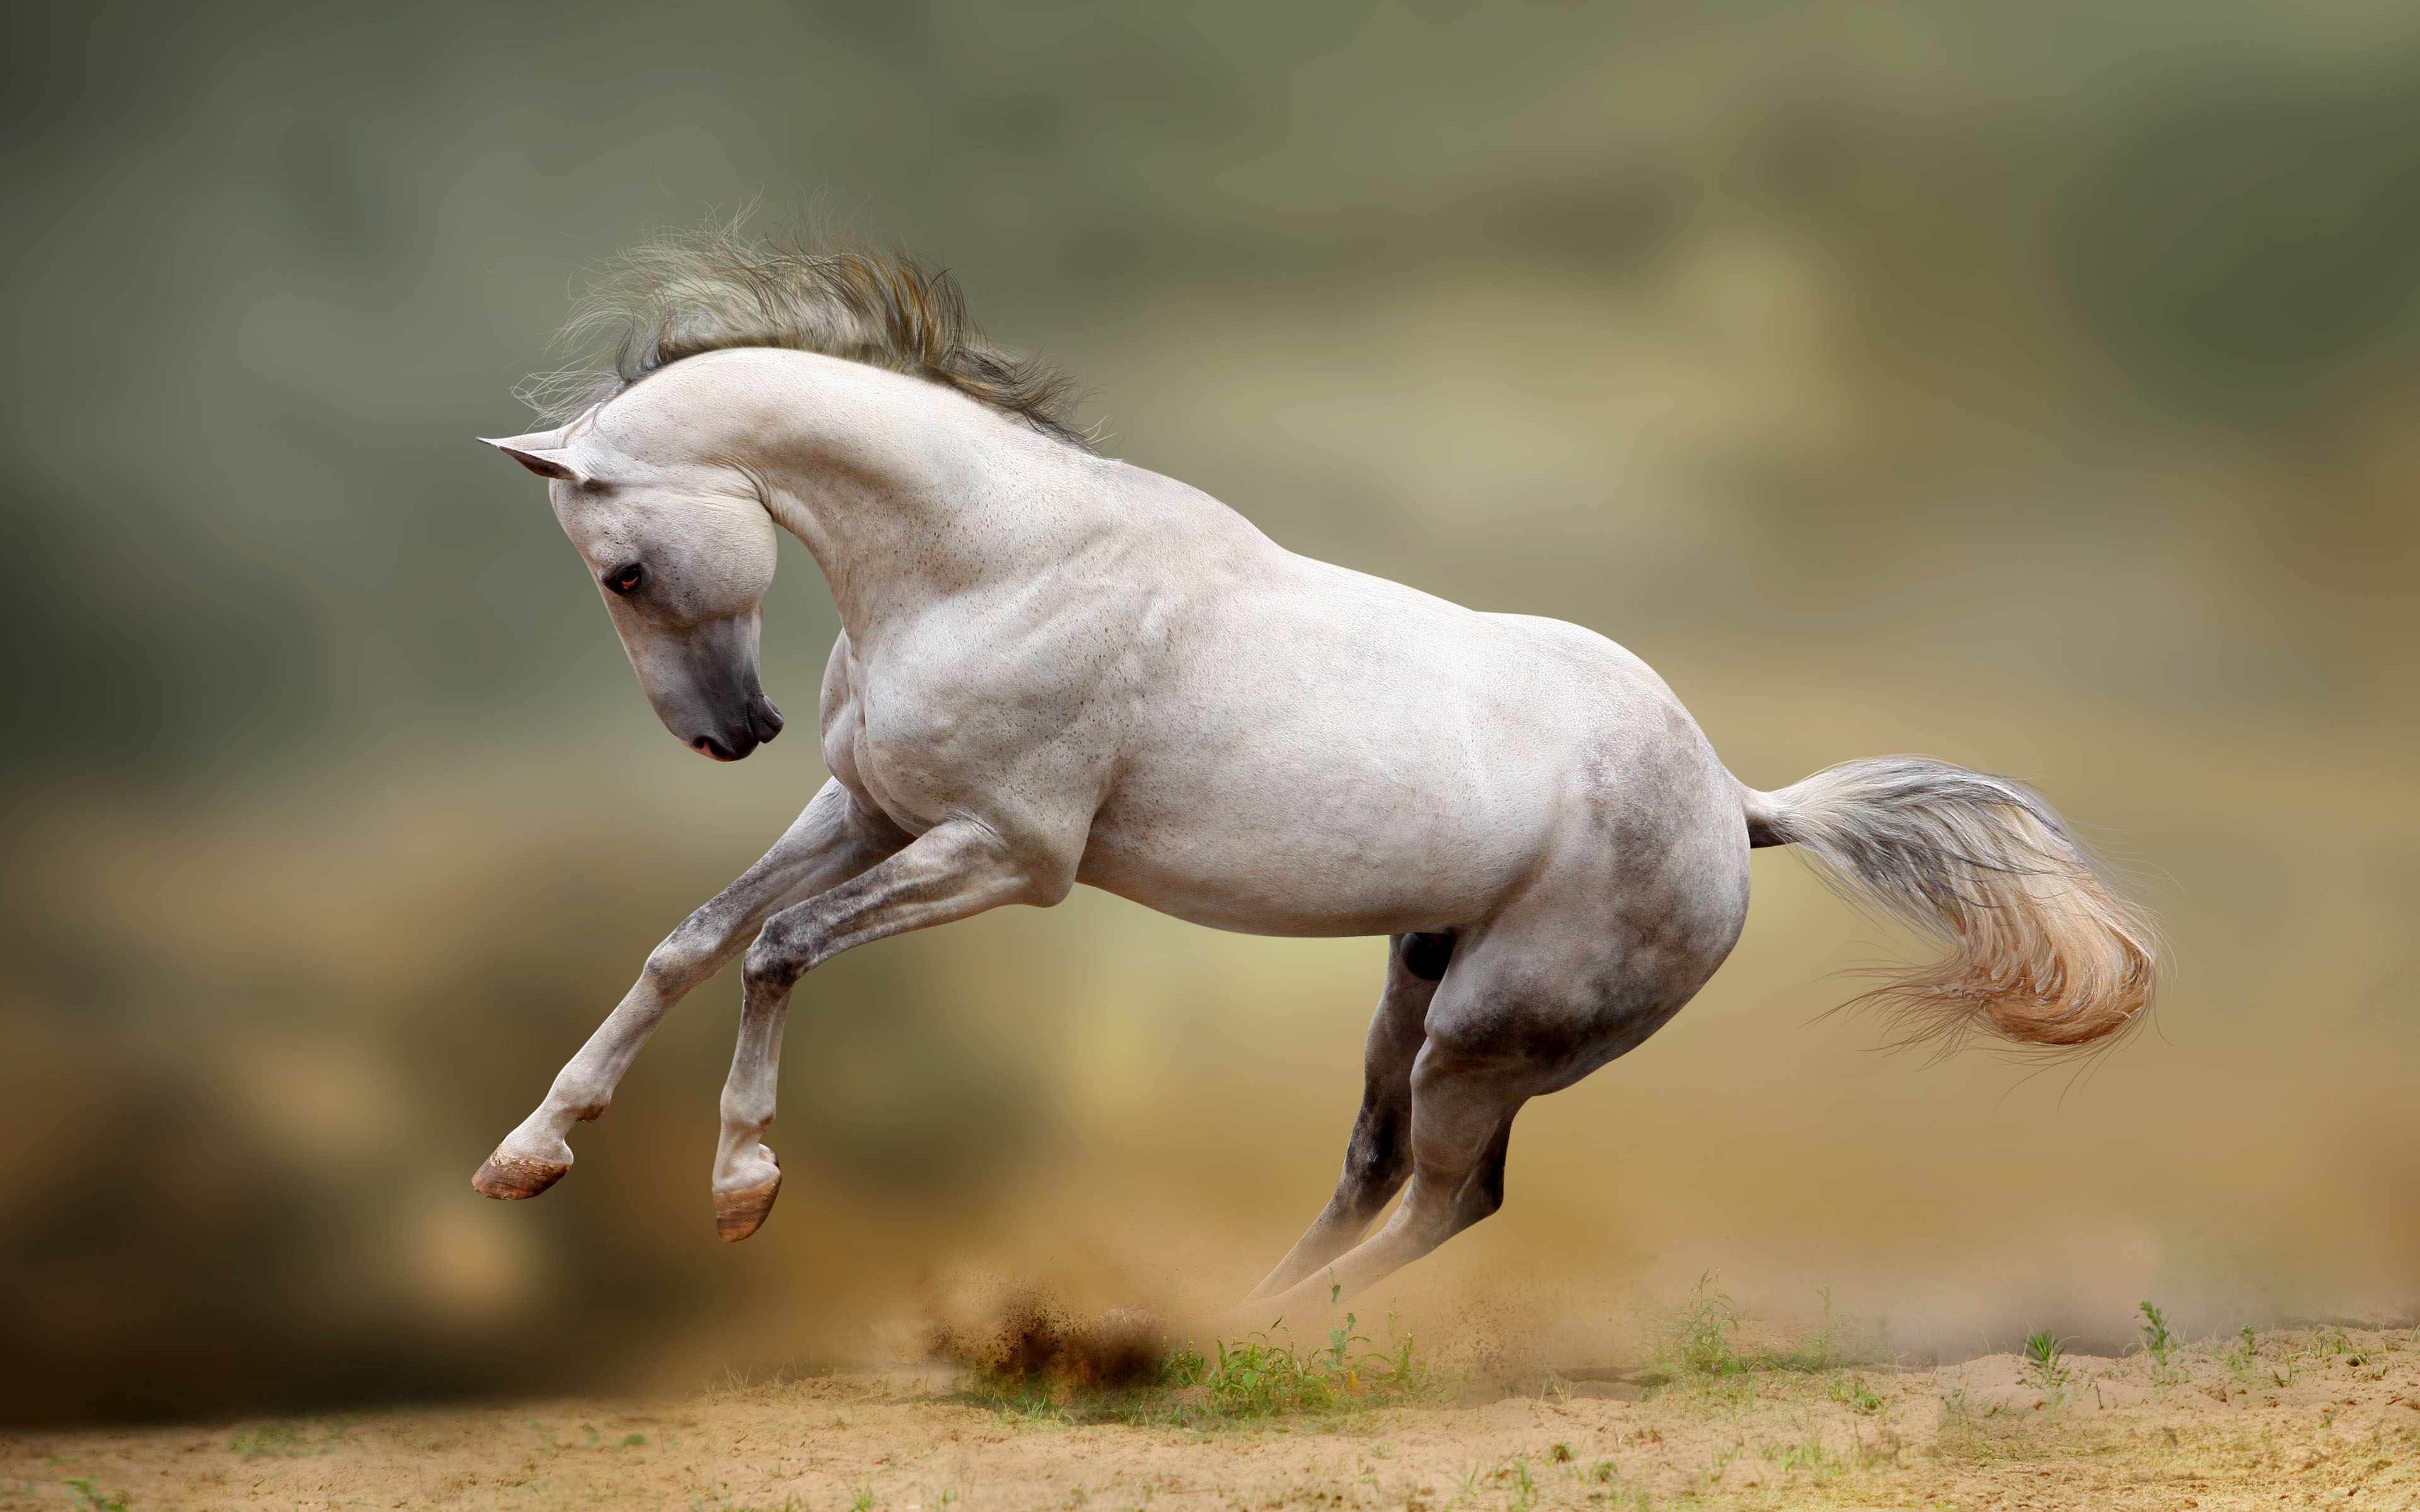 280+ 4K Horse Wallpapers | Background Images